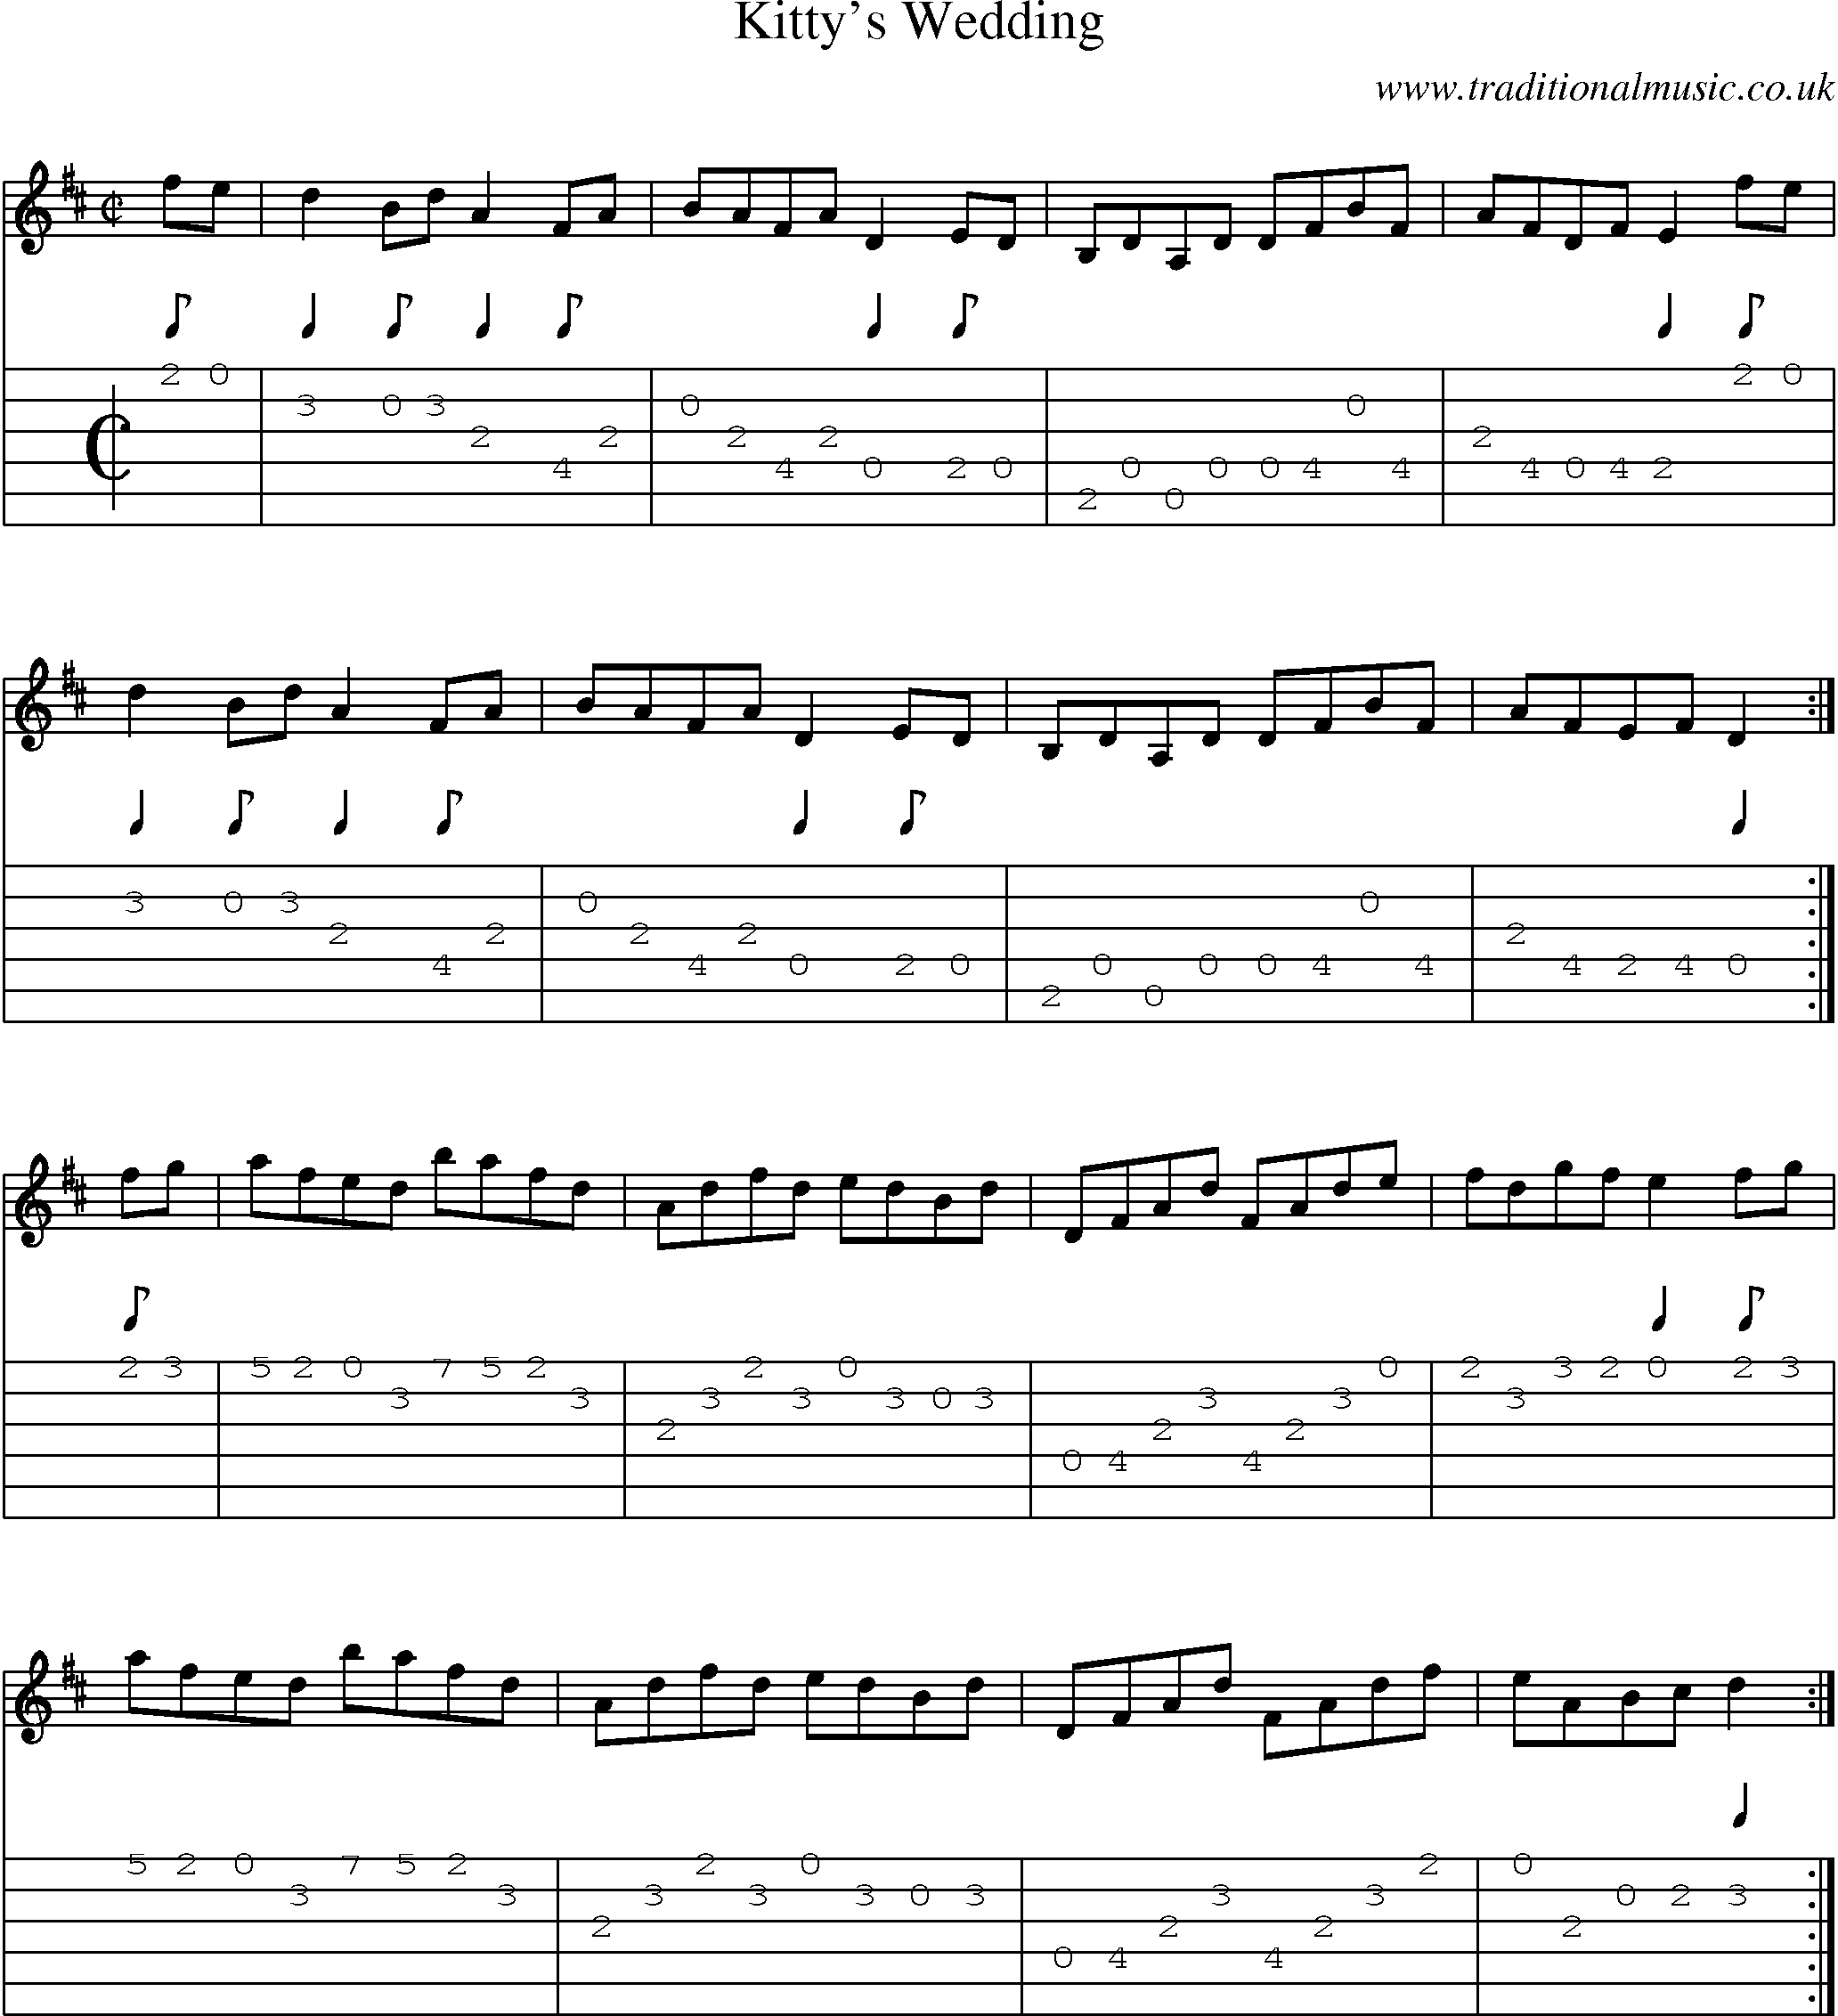 Music Score and Guitar Tabs for Kittys Wedding